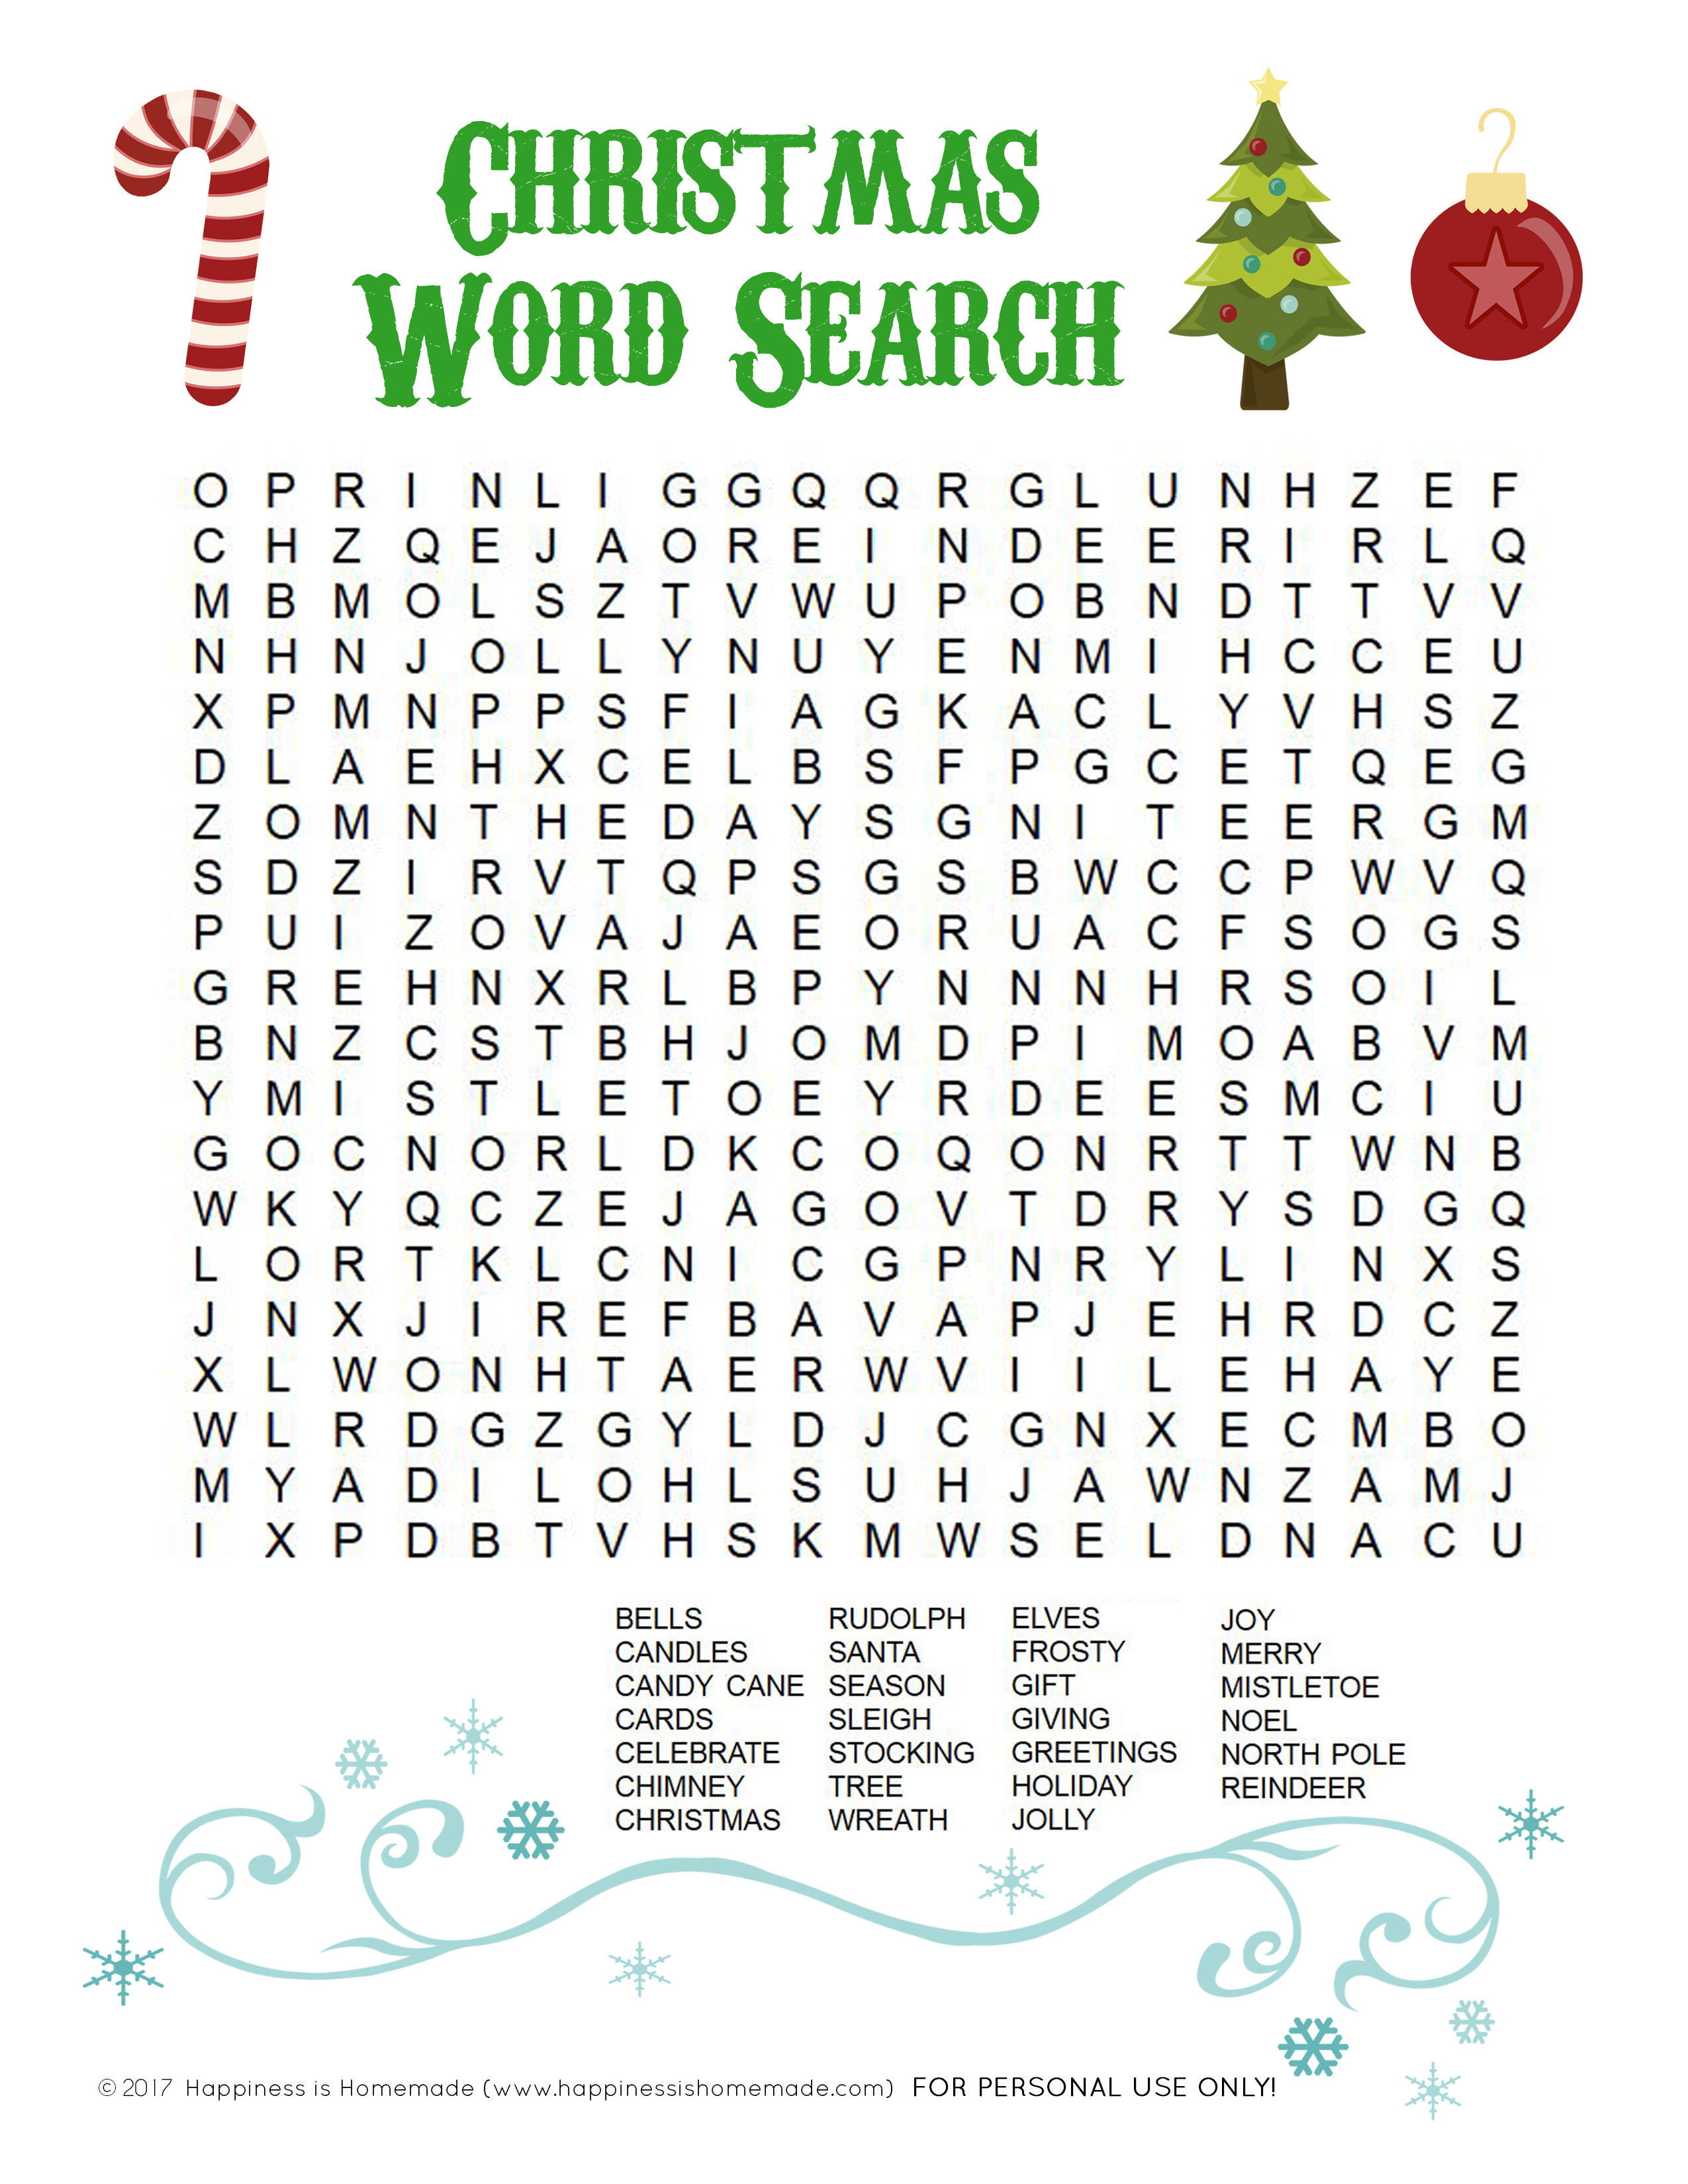 Printable Christmas Word Search for Kids & Adults Happiness is Homemade